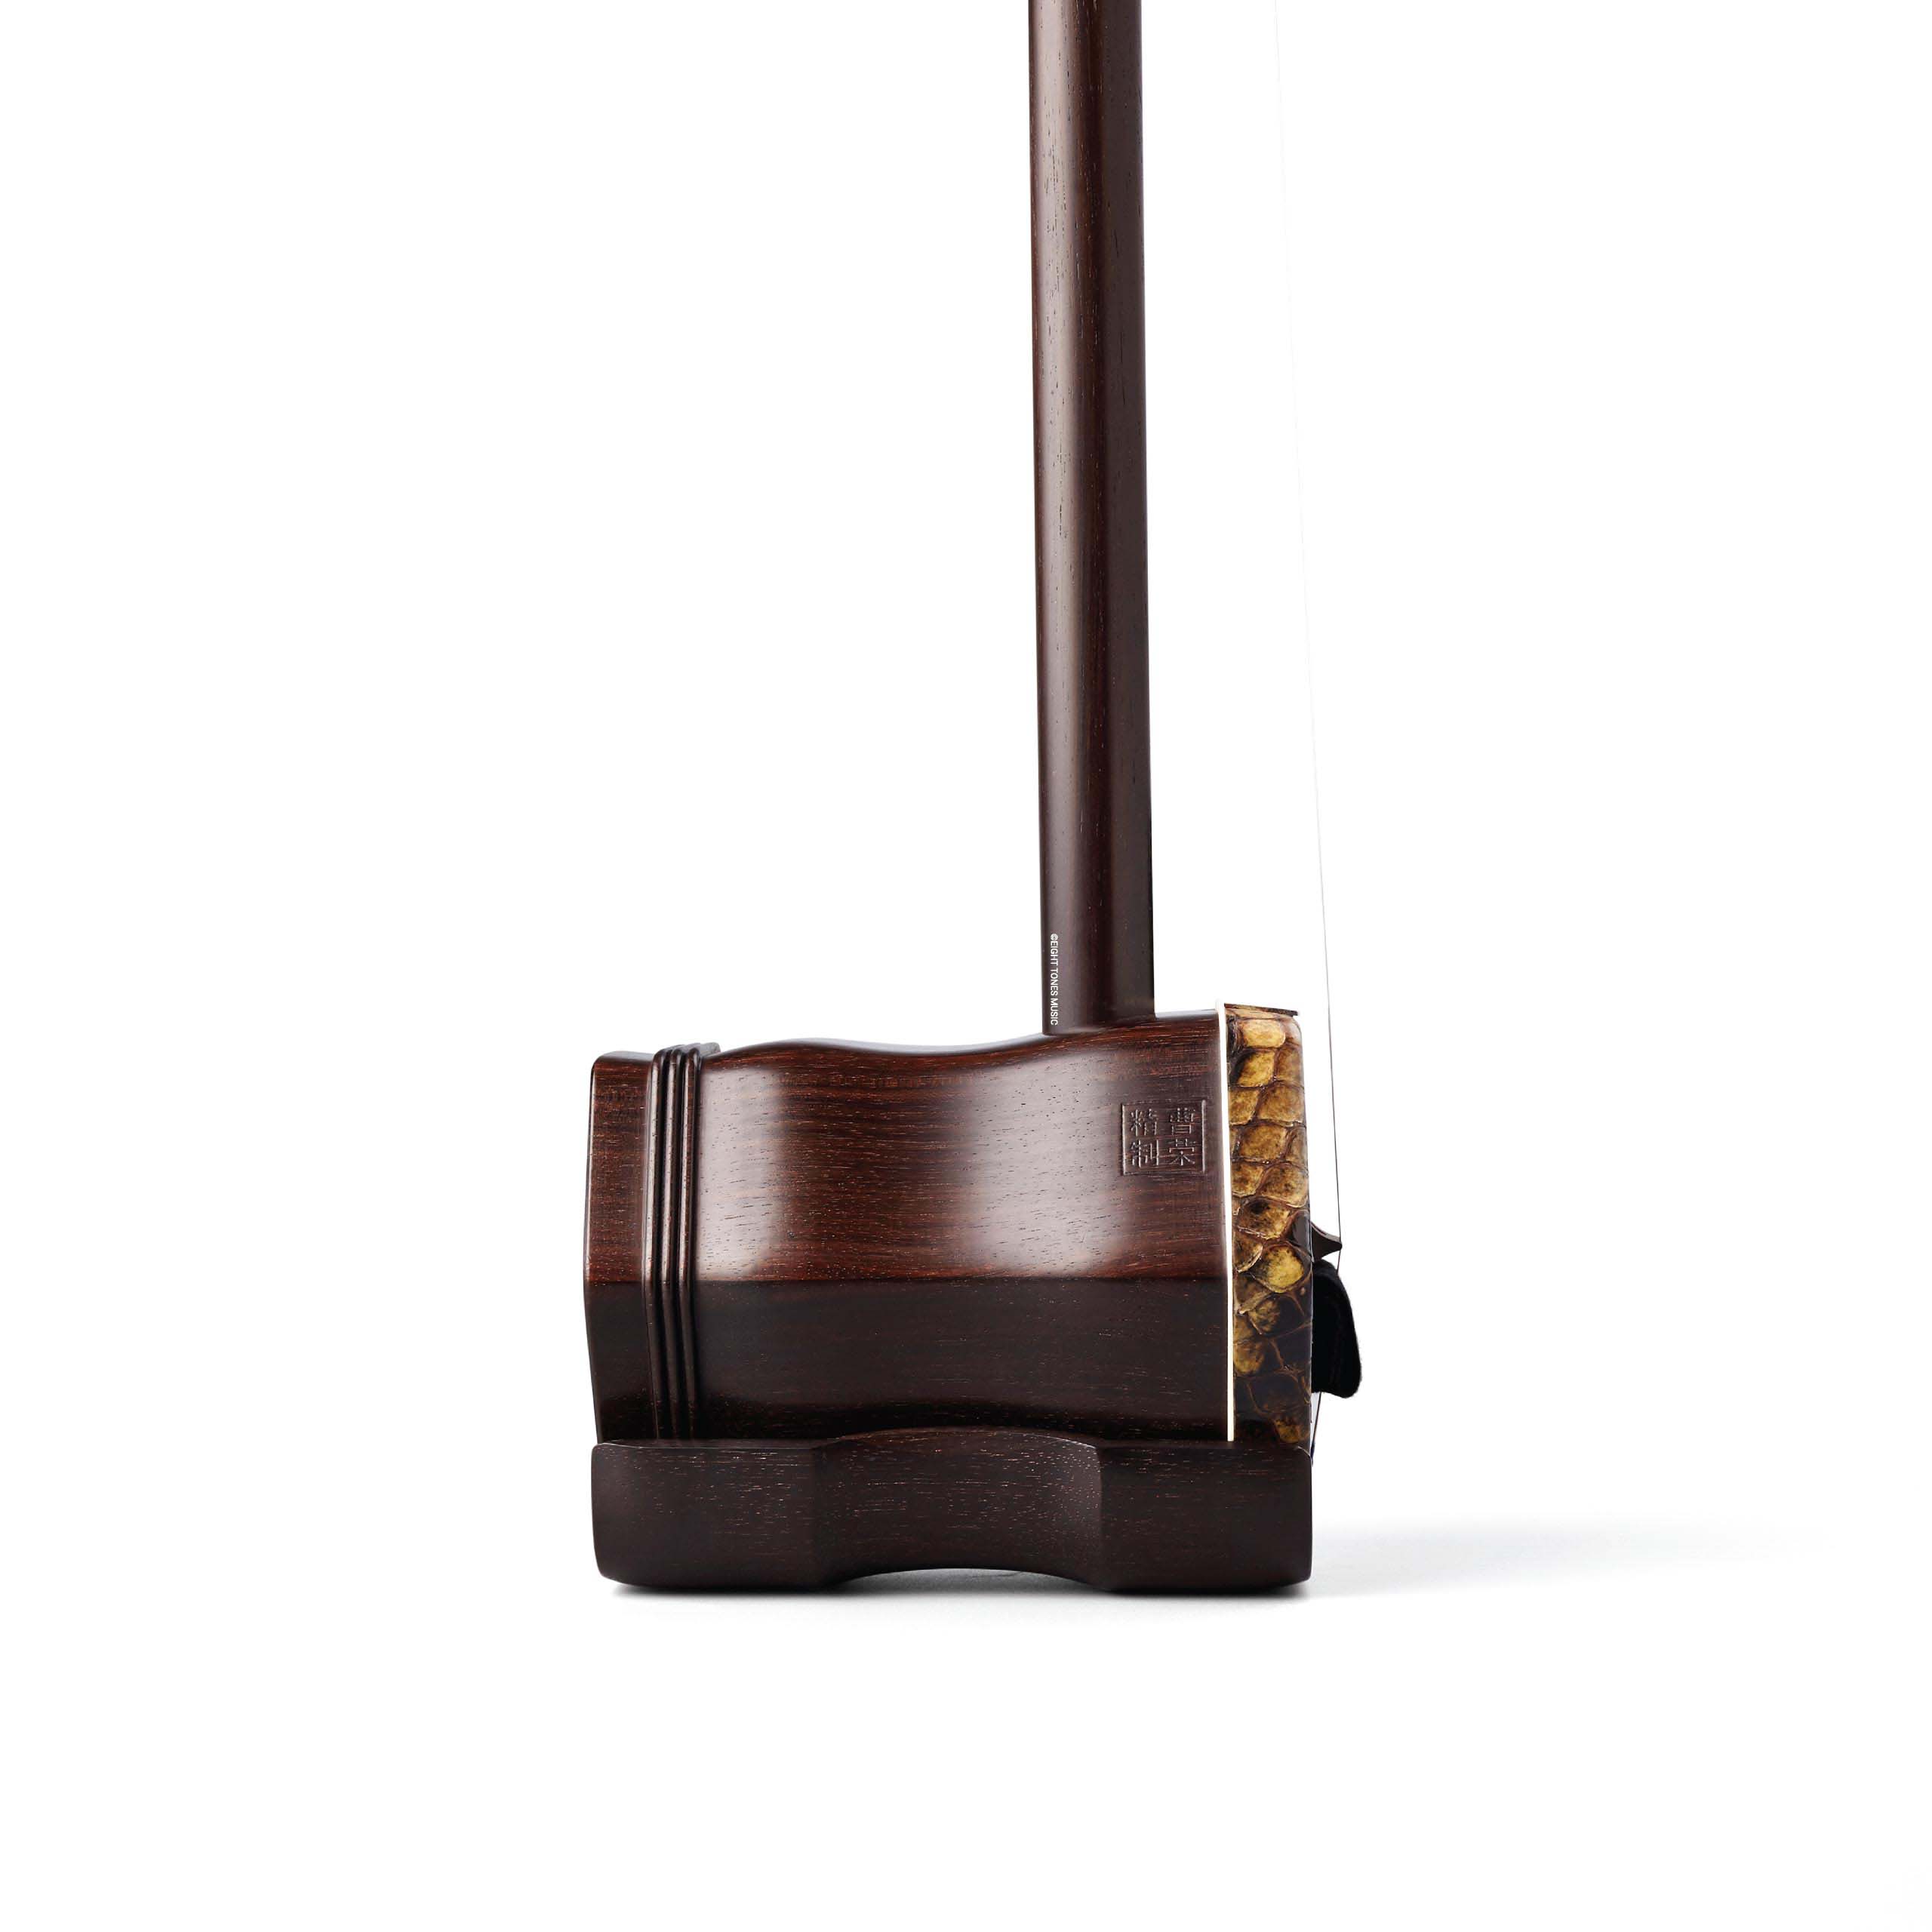 Cao Rong 1st Grade Aged Rosewood Erhu right